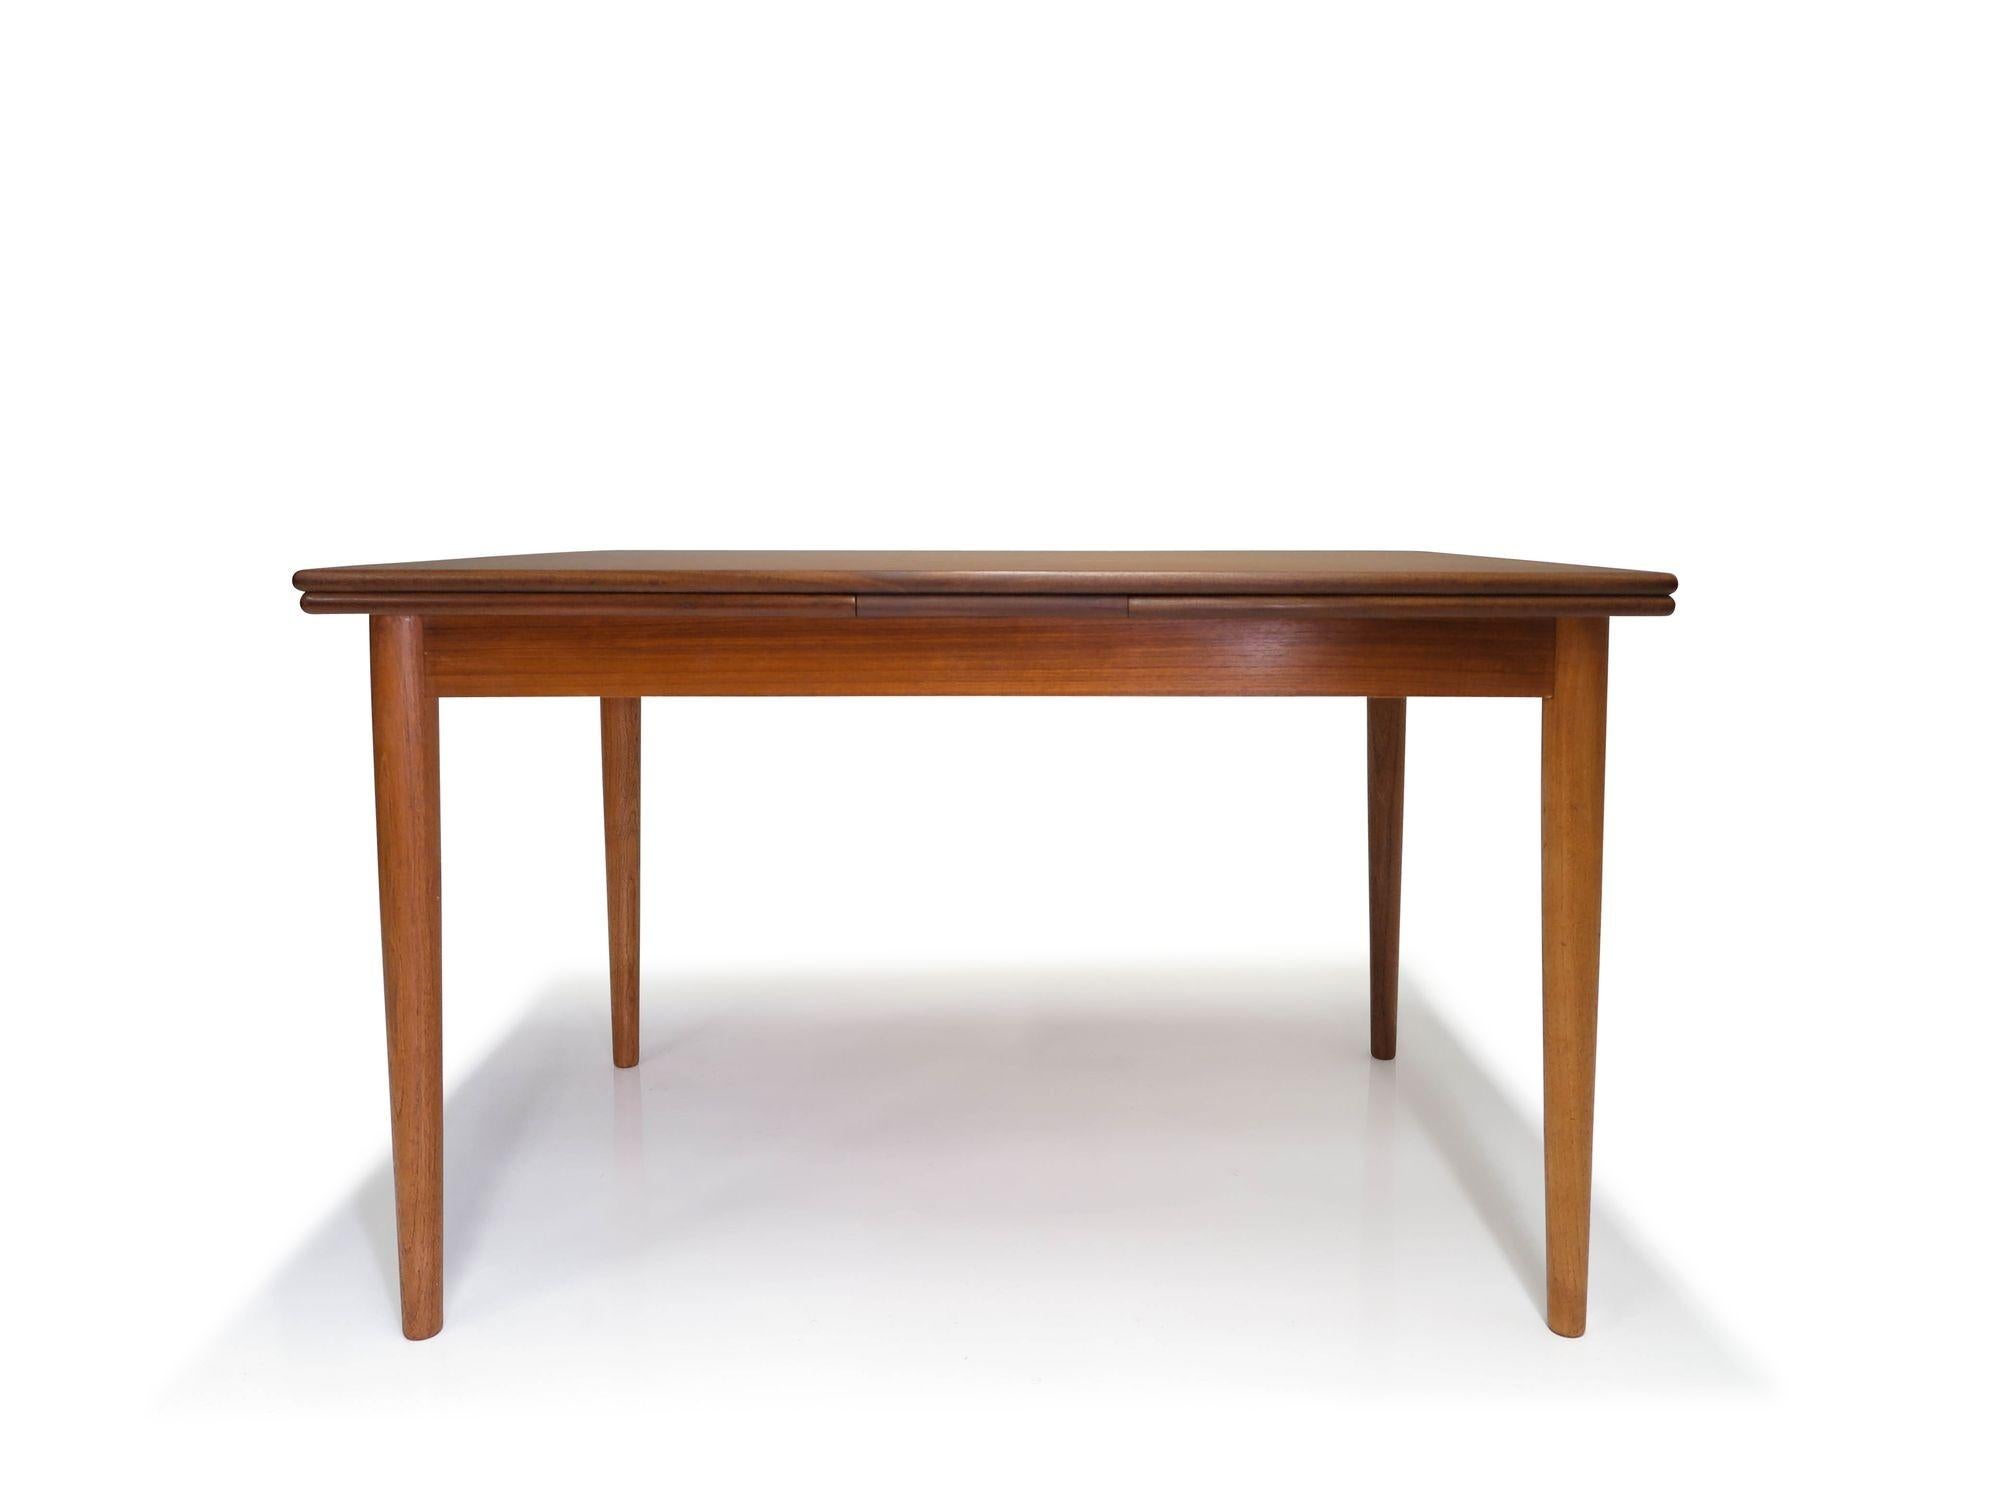 Finely crafted Danish teak dining table attributed to Arne Vodder, 1958, Denmark. The dining table is crafted of teak with solid wood edge band, and two draw-leaves on either end. The table is raised on tapered legs. The table has been